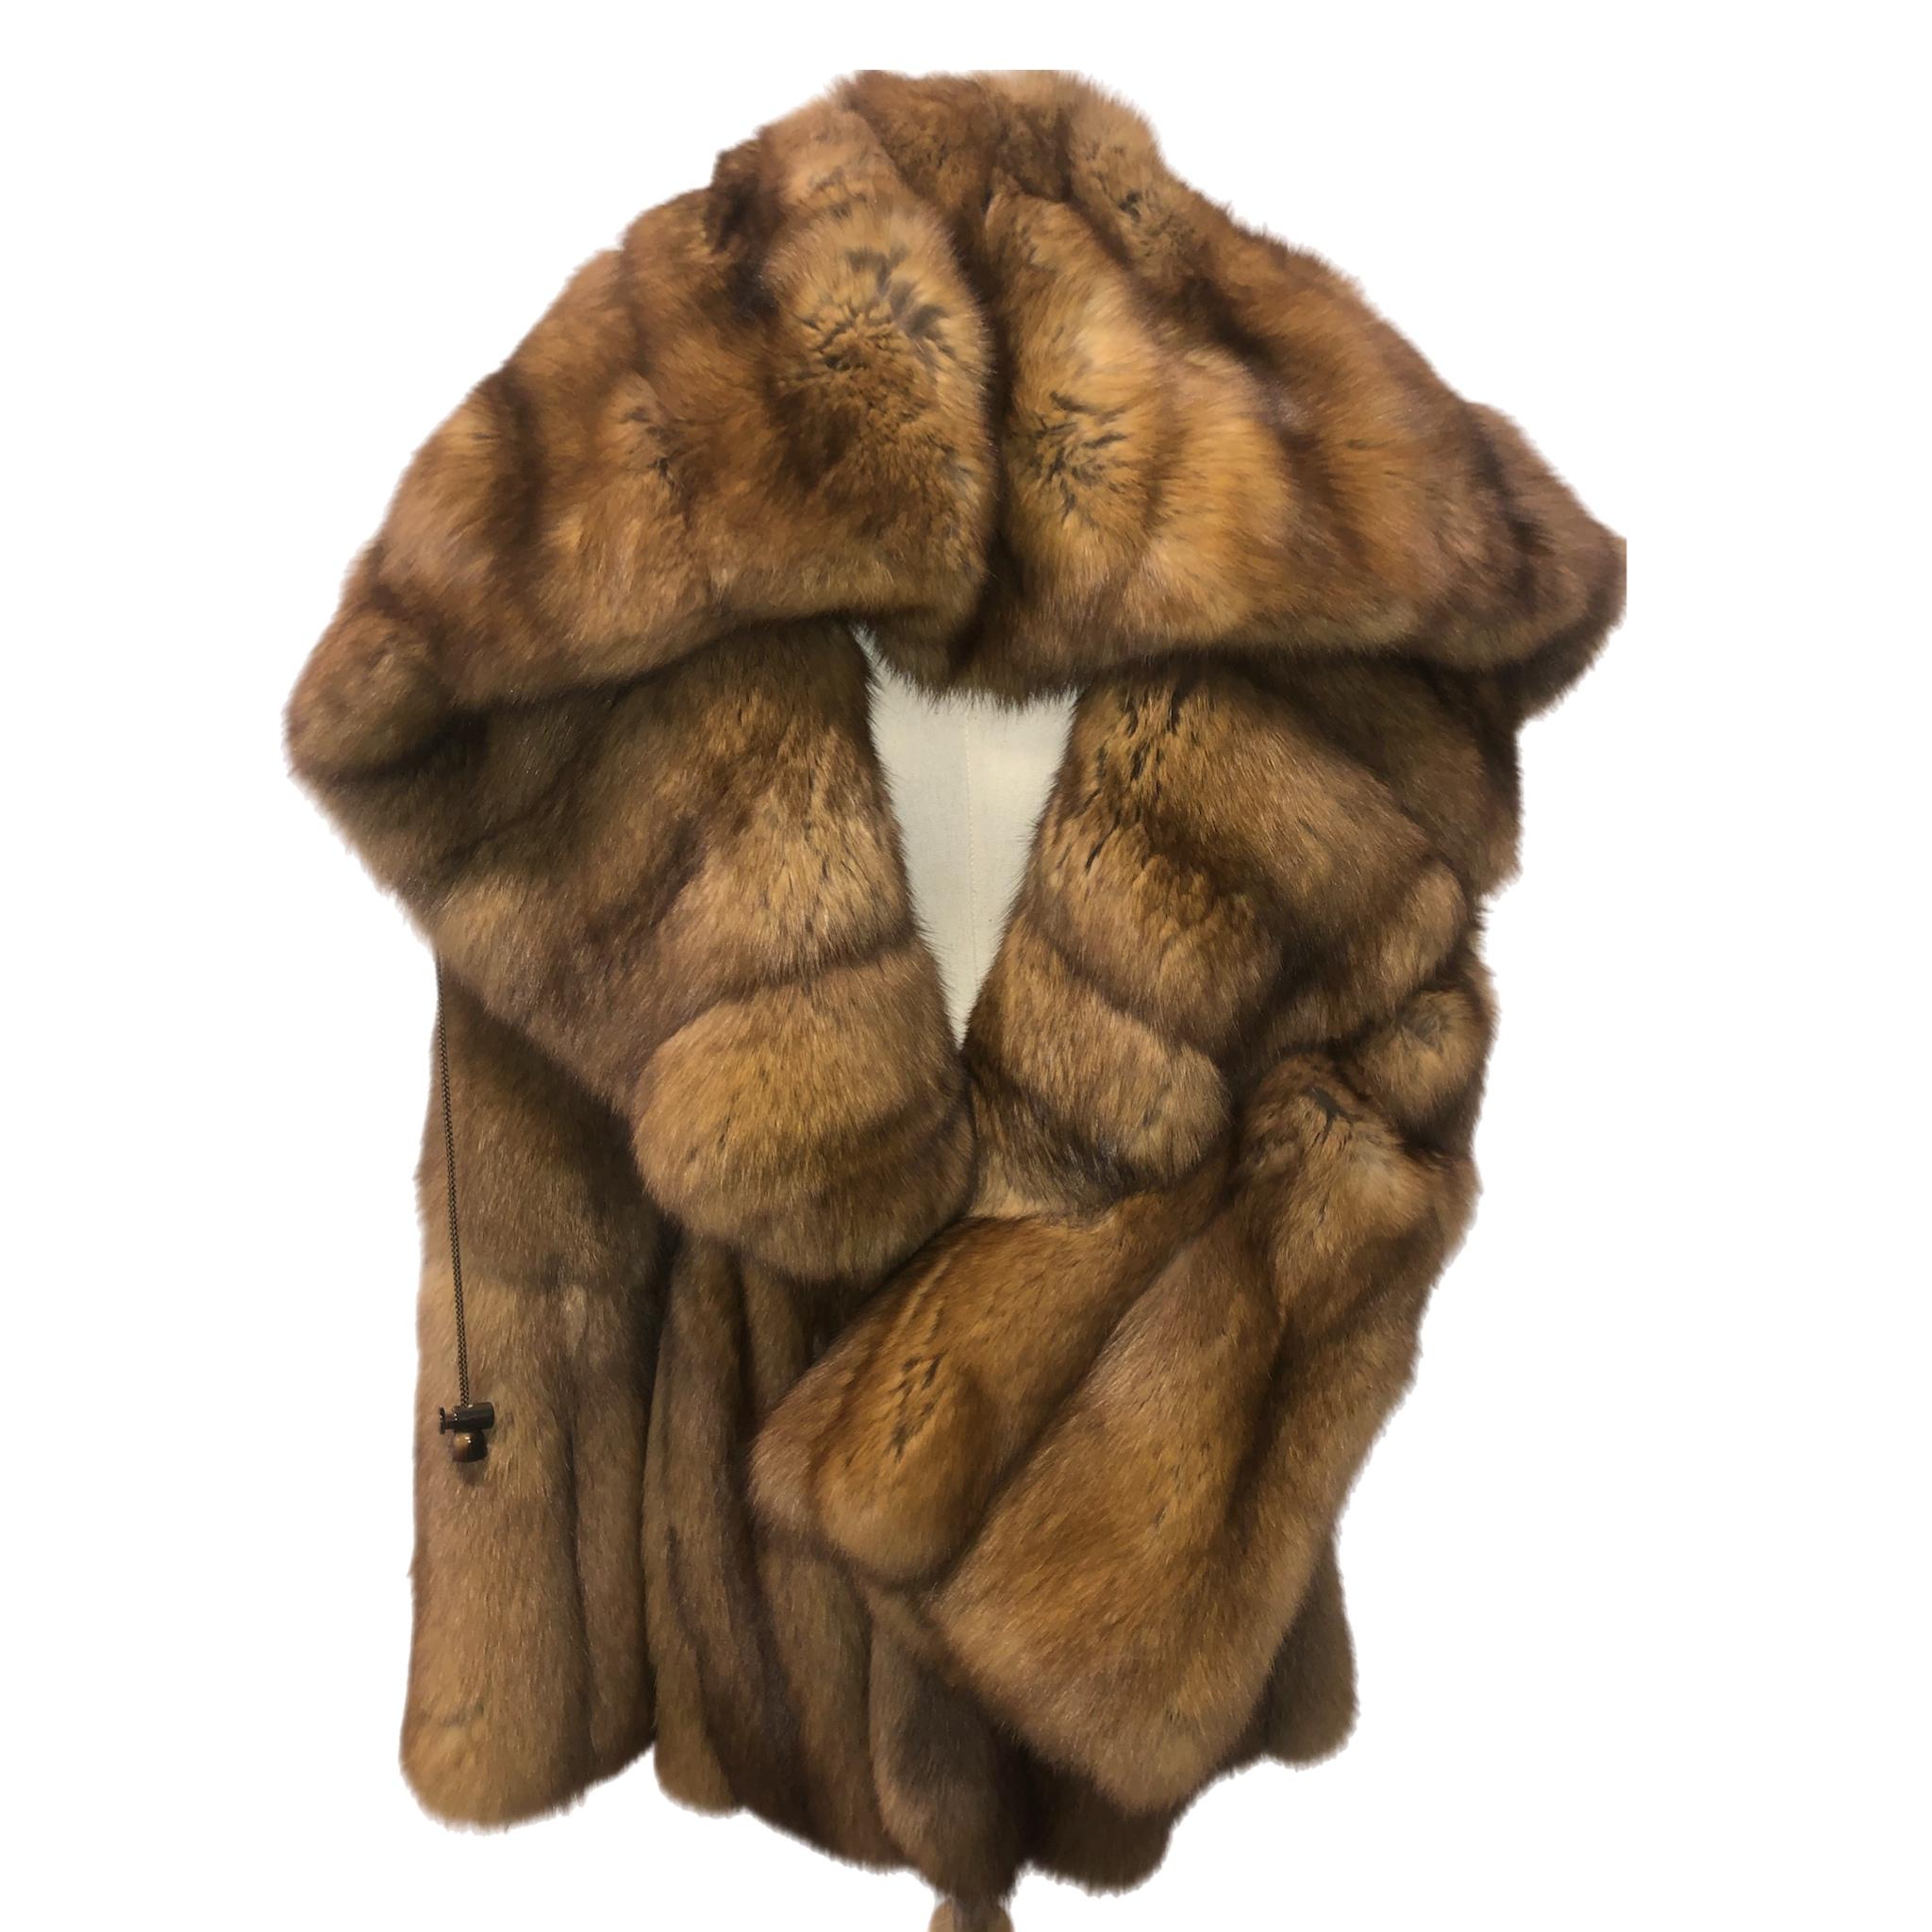 Bisang Russian Sable fur coat size 14-16 tags 65000$ For Sale 4